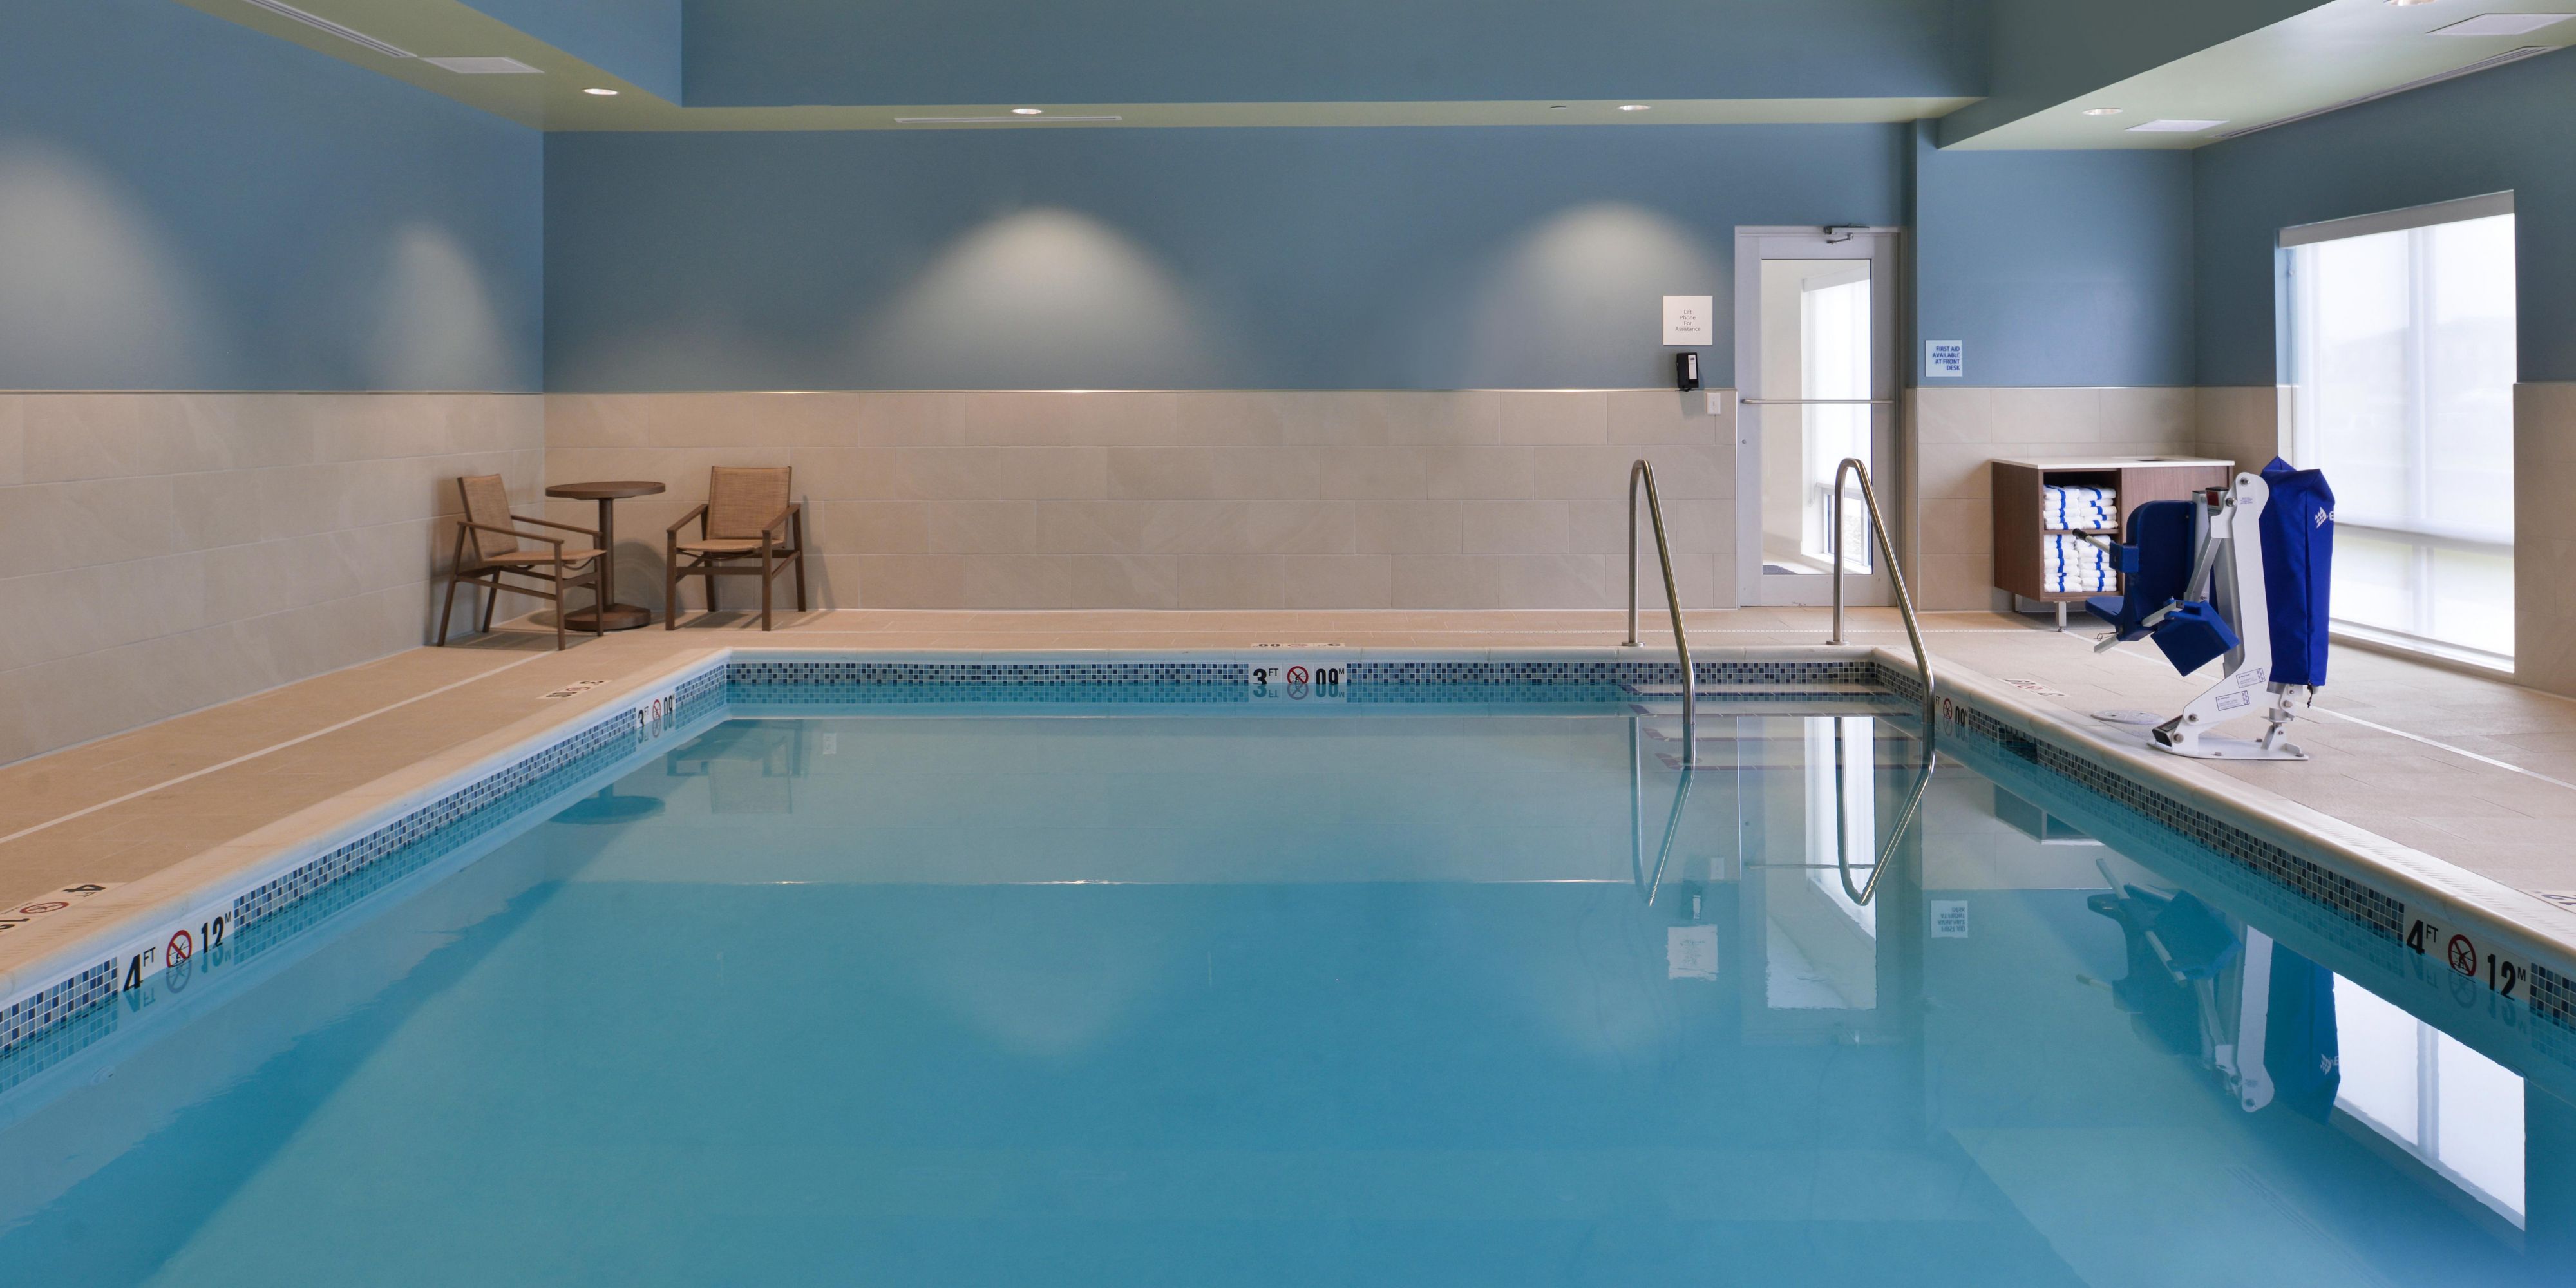 Our hotel is equipped with an indoor heated pool and a Fitness Center.

Fitness Center includes both weights and cardio equipment. 